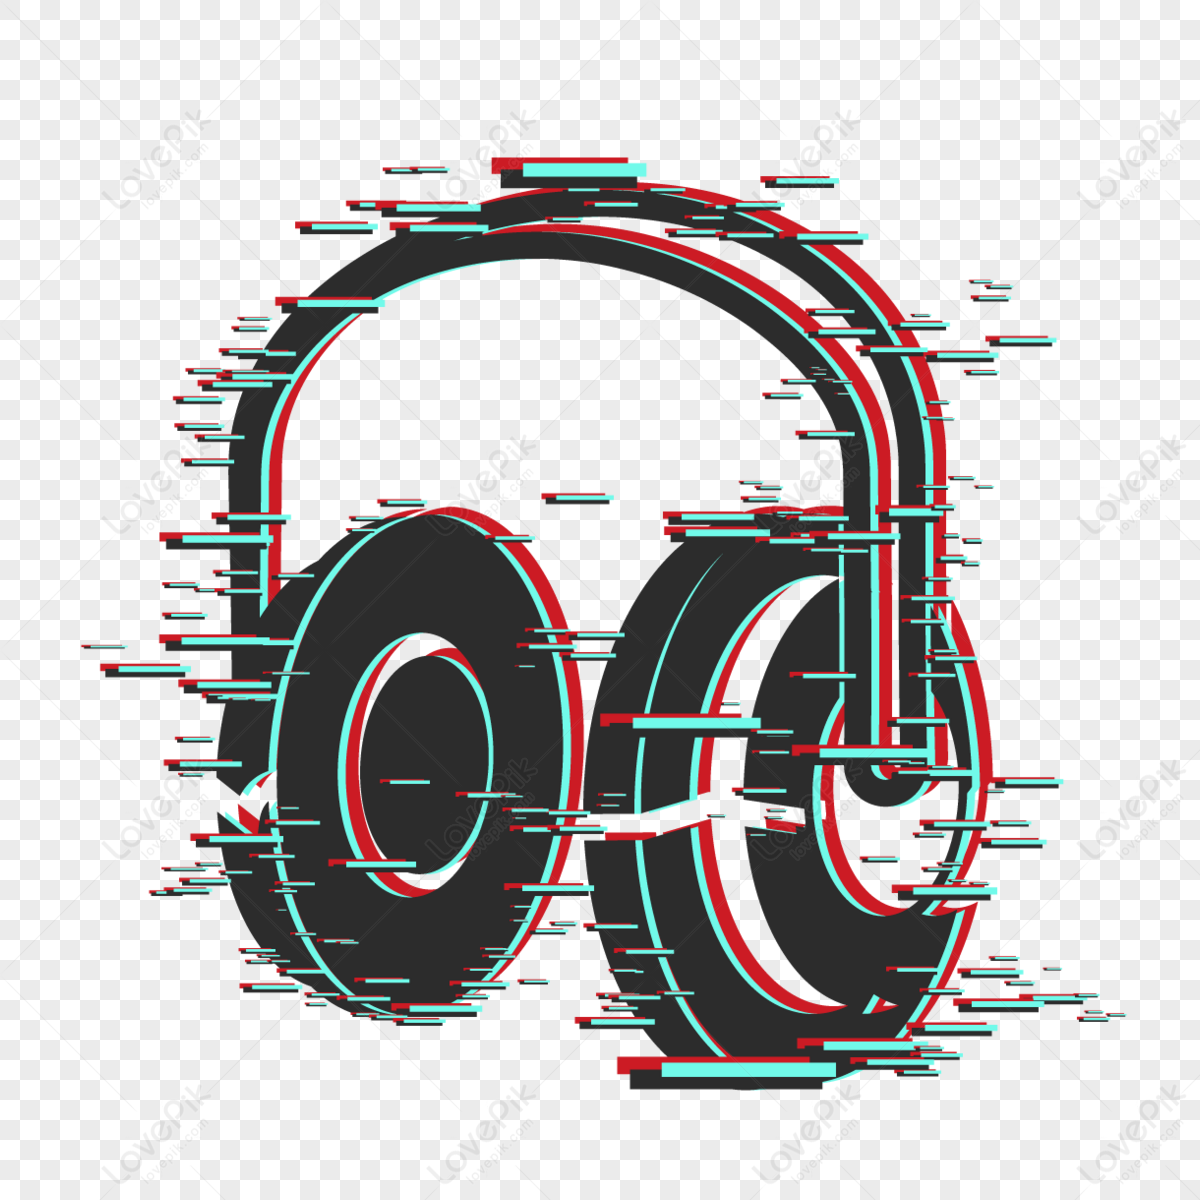 Wireless Earphone PNG Images With Transparent Background | Free ...